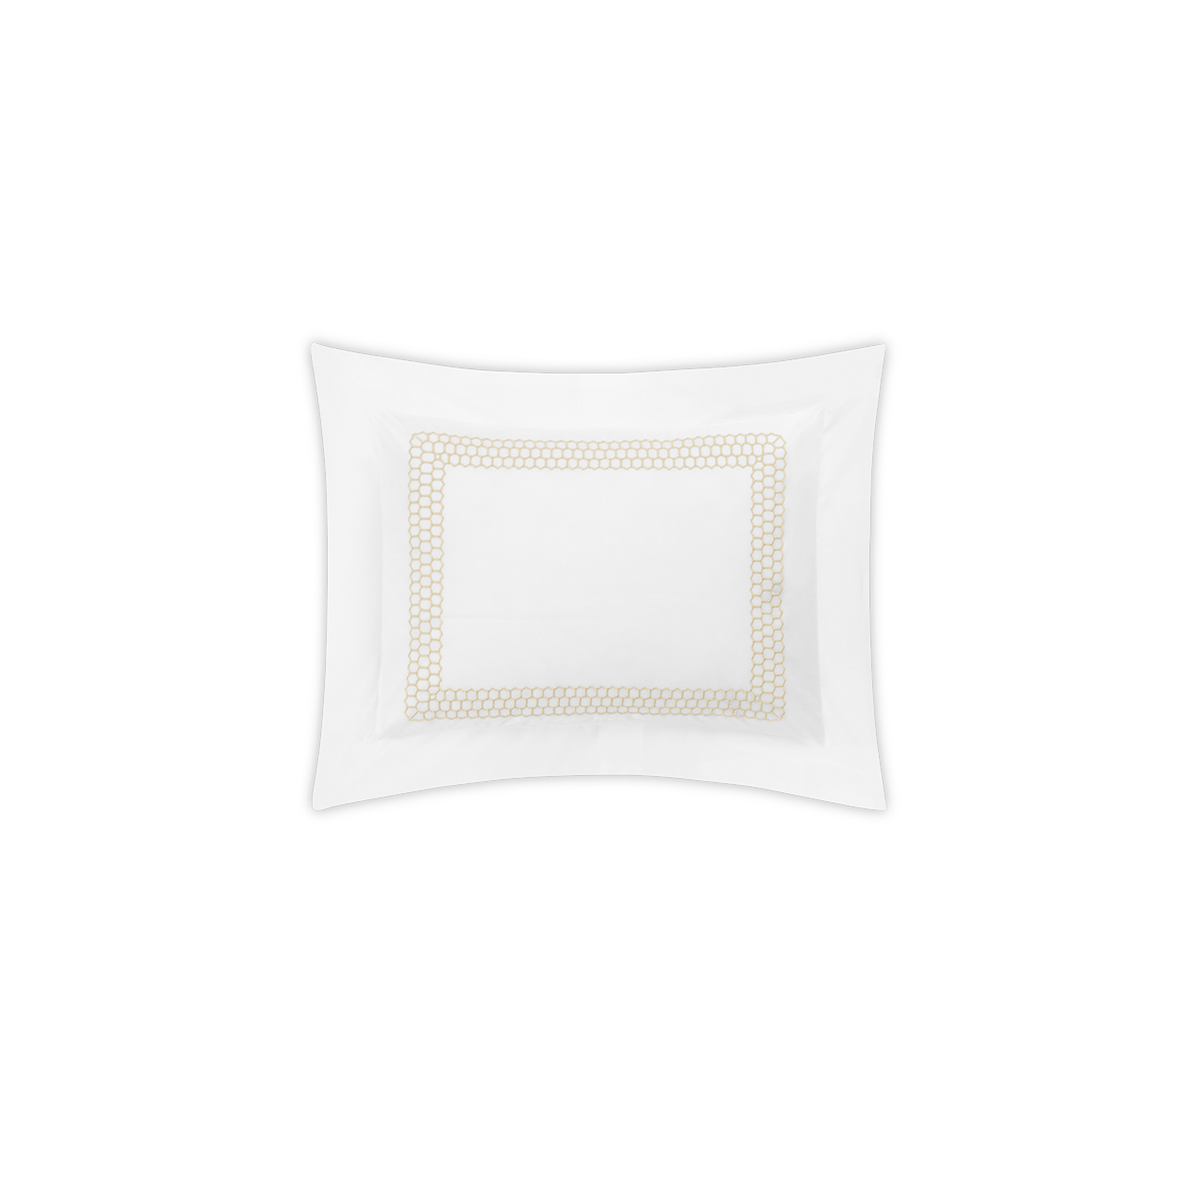 Clear Image of Matouk Liana Bedding Boudoir Sham in Champagne Color